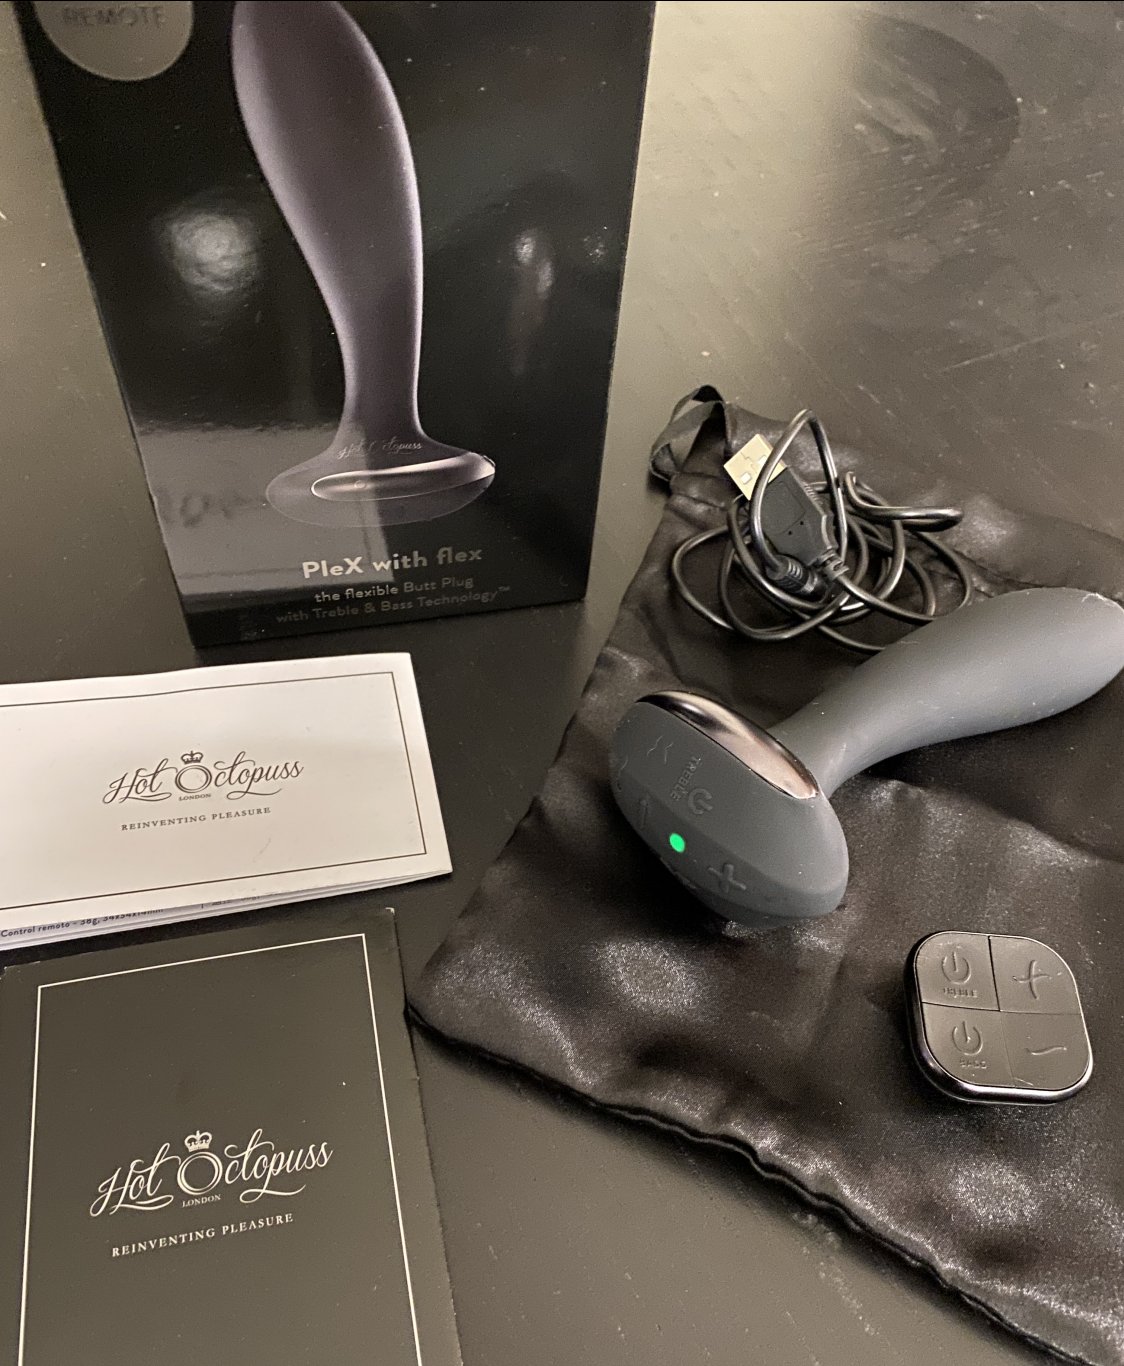 The Hot Octopuss PleX with Flex sits out on a countertop with everything that is included in the packaging. There is the anal vibe, the remote control, the charging cable, the instruction manual, and black drawstring bag.